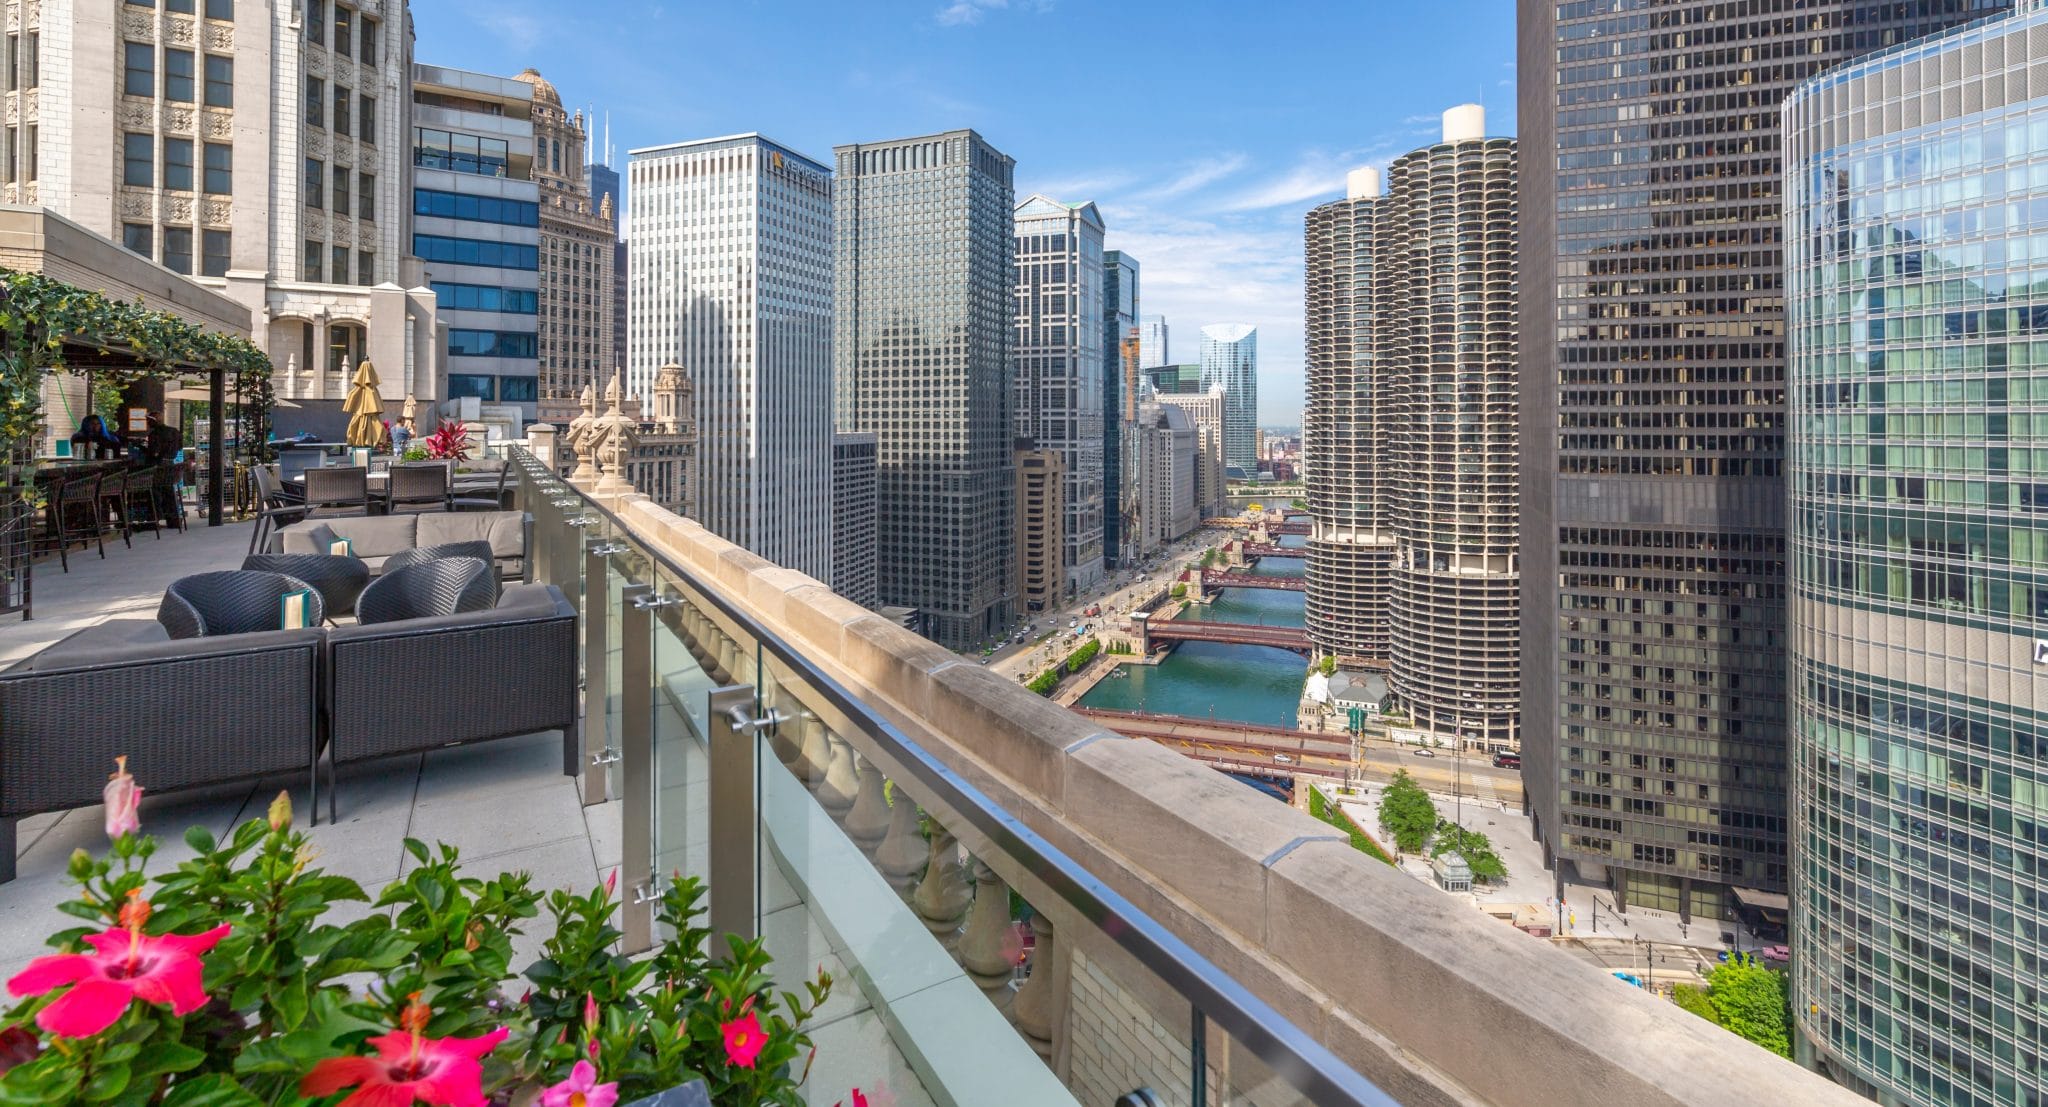 Photo of flowers and seats on a rooftop terrace overlooking the Chicago River